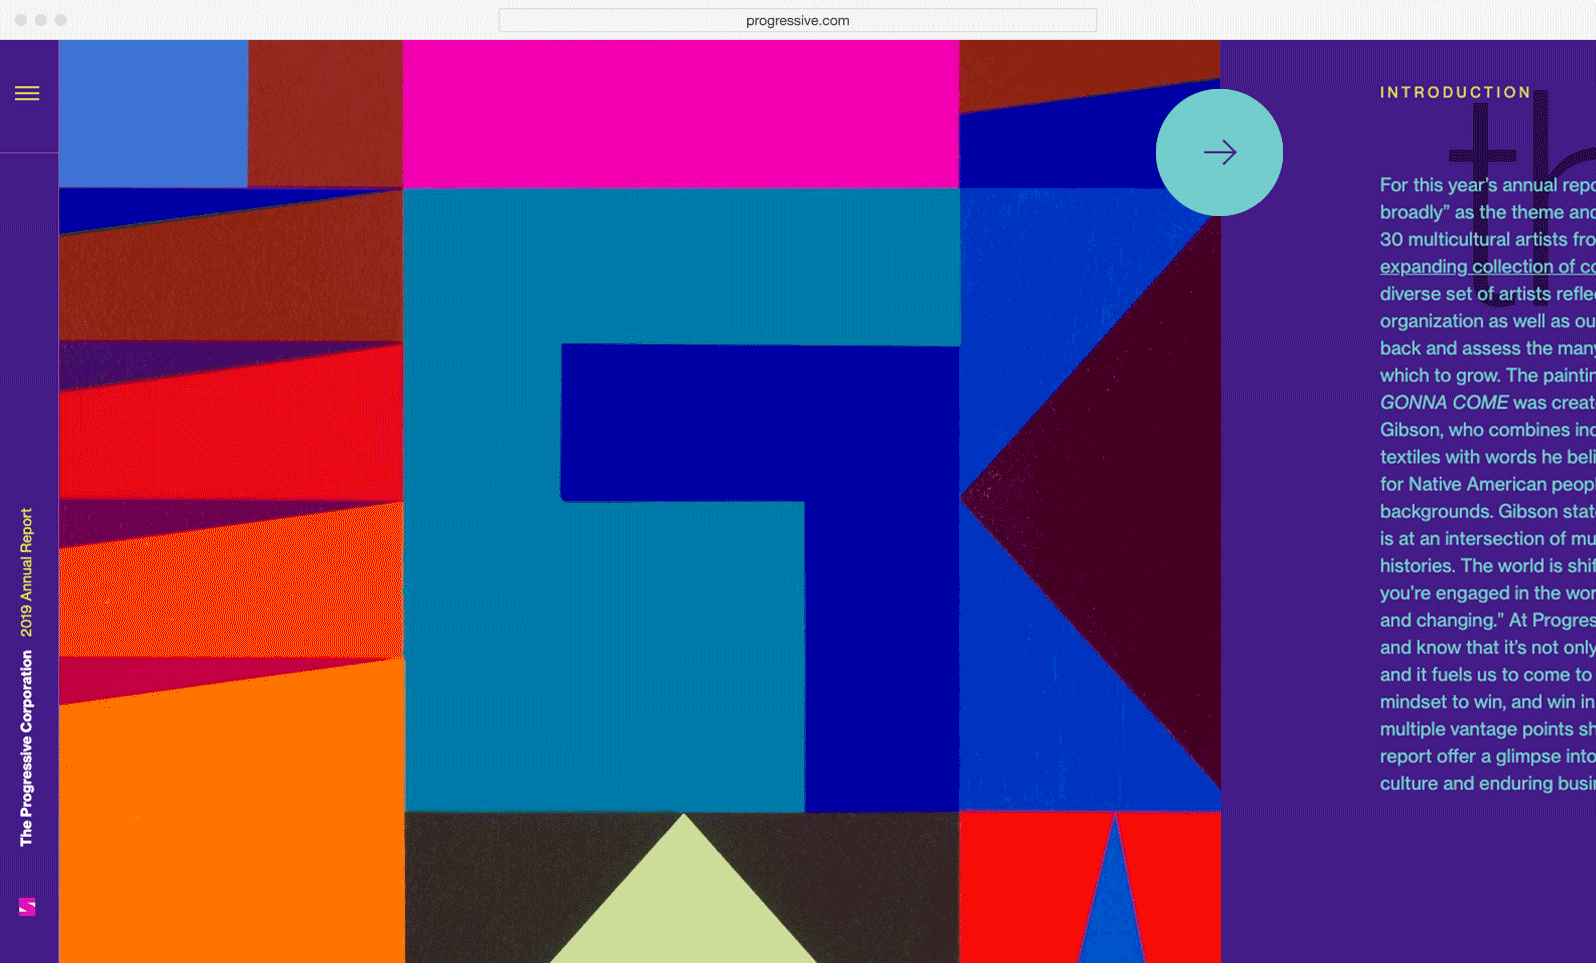 GIF animation of the 2019 Progressive Corporation annual report web design, featuring Jeffrey Gibson artwork on the microsite